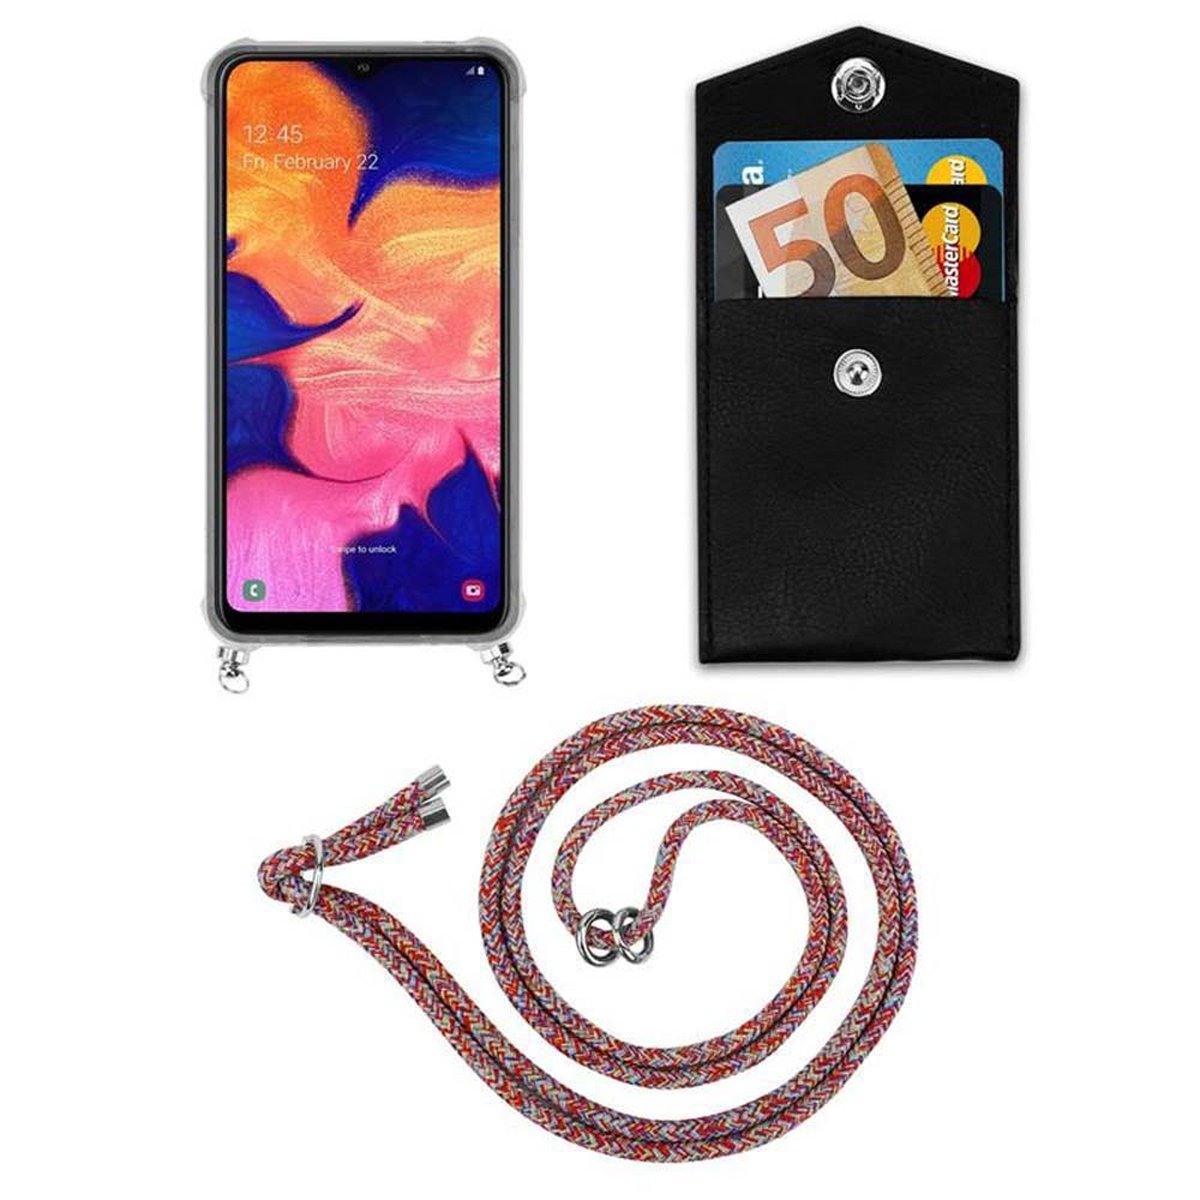 Ringen, Band Samsung, CADORABO Backcover, Handy mit A10 Hülle, Galaxy COLORFUL Silber abnehmbarer M10, Kordel Kette PARROT / und